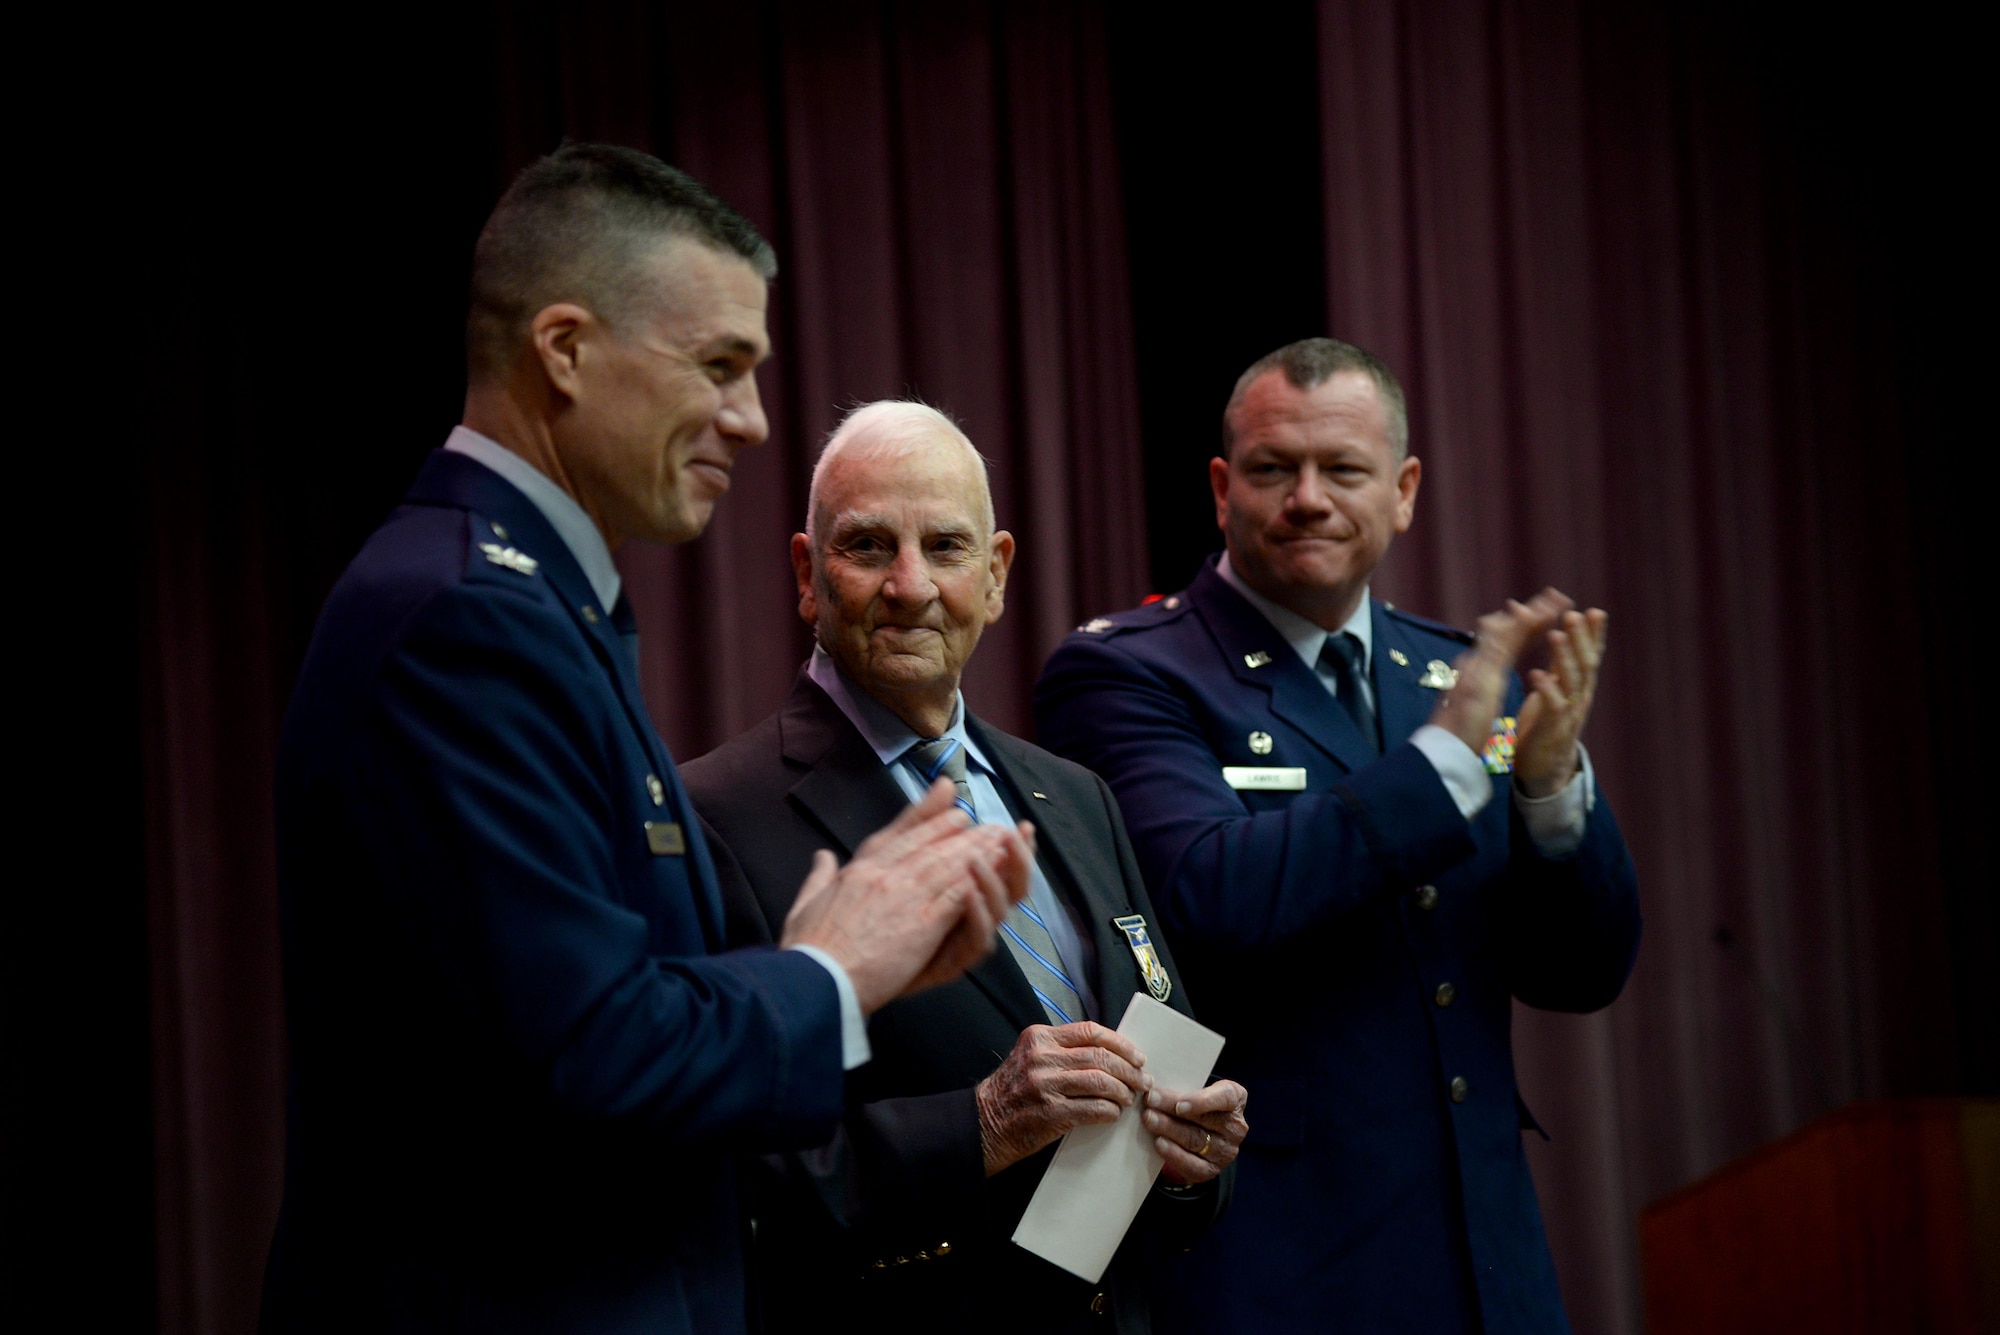 Col. Douglas Gosney, 14th Flying Training Wing commander, and Col. Stanley Lawrie, 14th Operations Group Commander, give retired Col. Carlyle “Smitty” Harris, former Vietnam War prisoner of war, a standing ovation after his graduation speech to Specialized Undergraduate Pilot Training Class 18-06 March 9, 2018, on Columbus Air Force Base, Mississippi. Harris spent 2,871 days in Vietnam as a POW after being shot down April 4, 1965.(U.S. Air Force photo by Airman 1st Class Keith Holcomb)